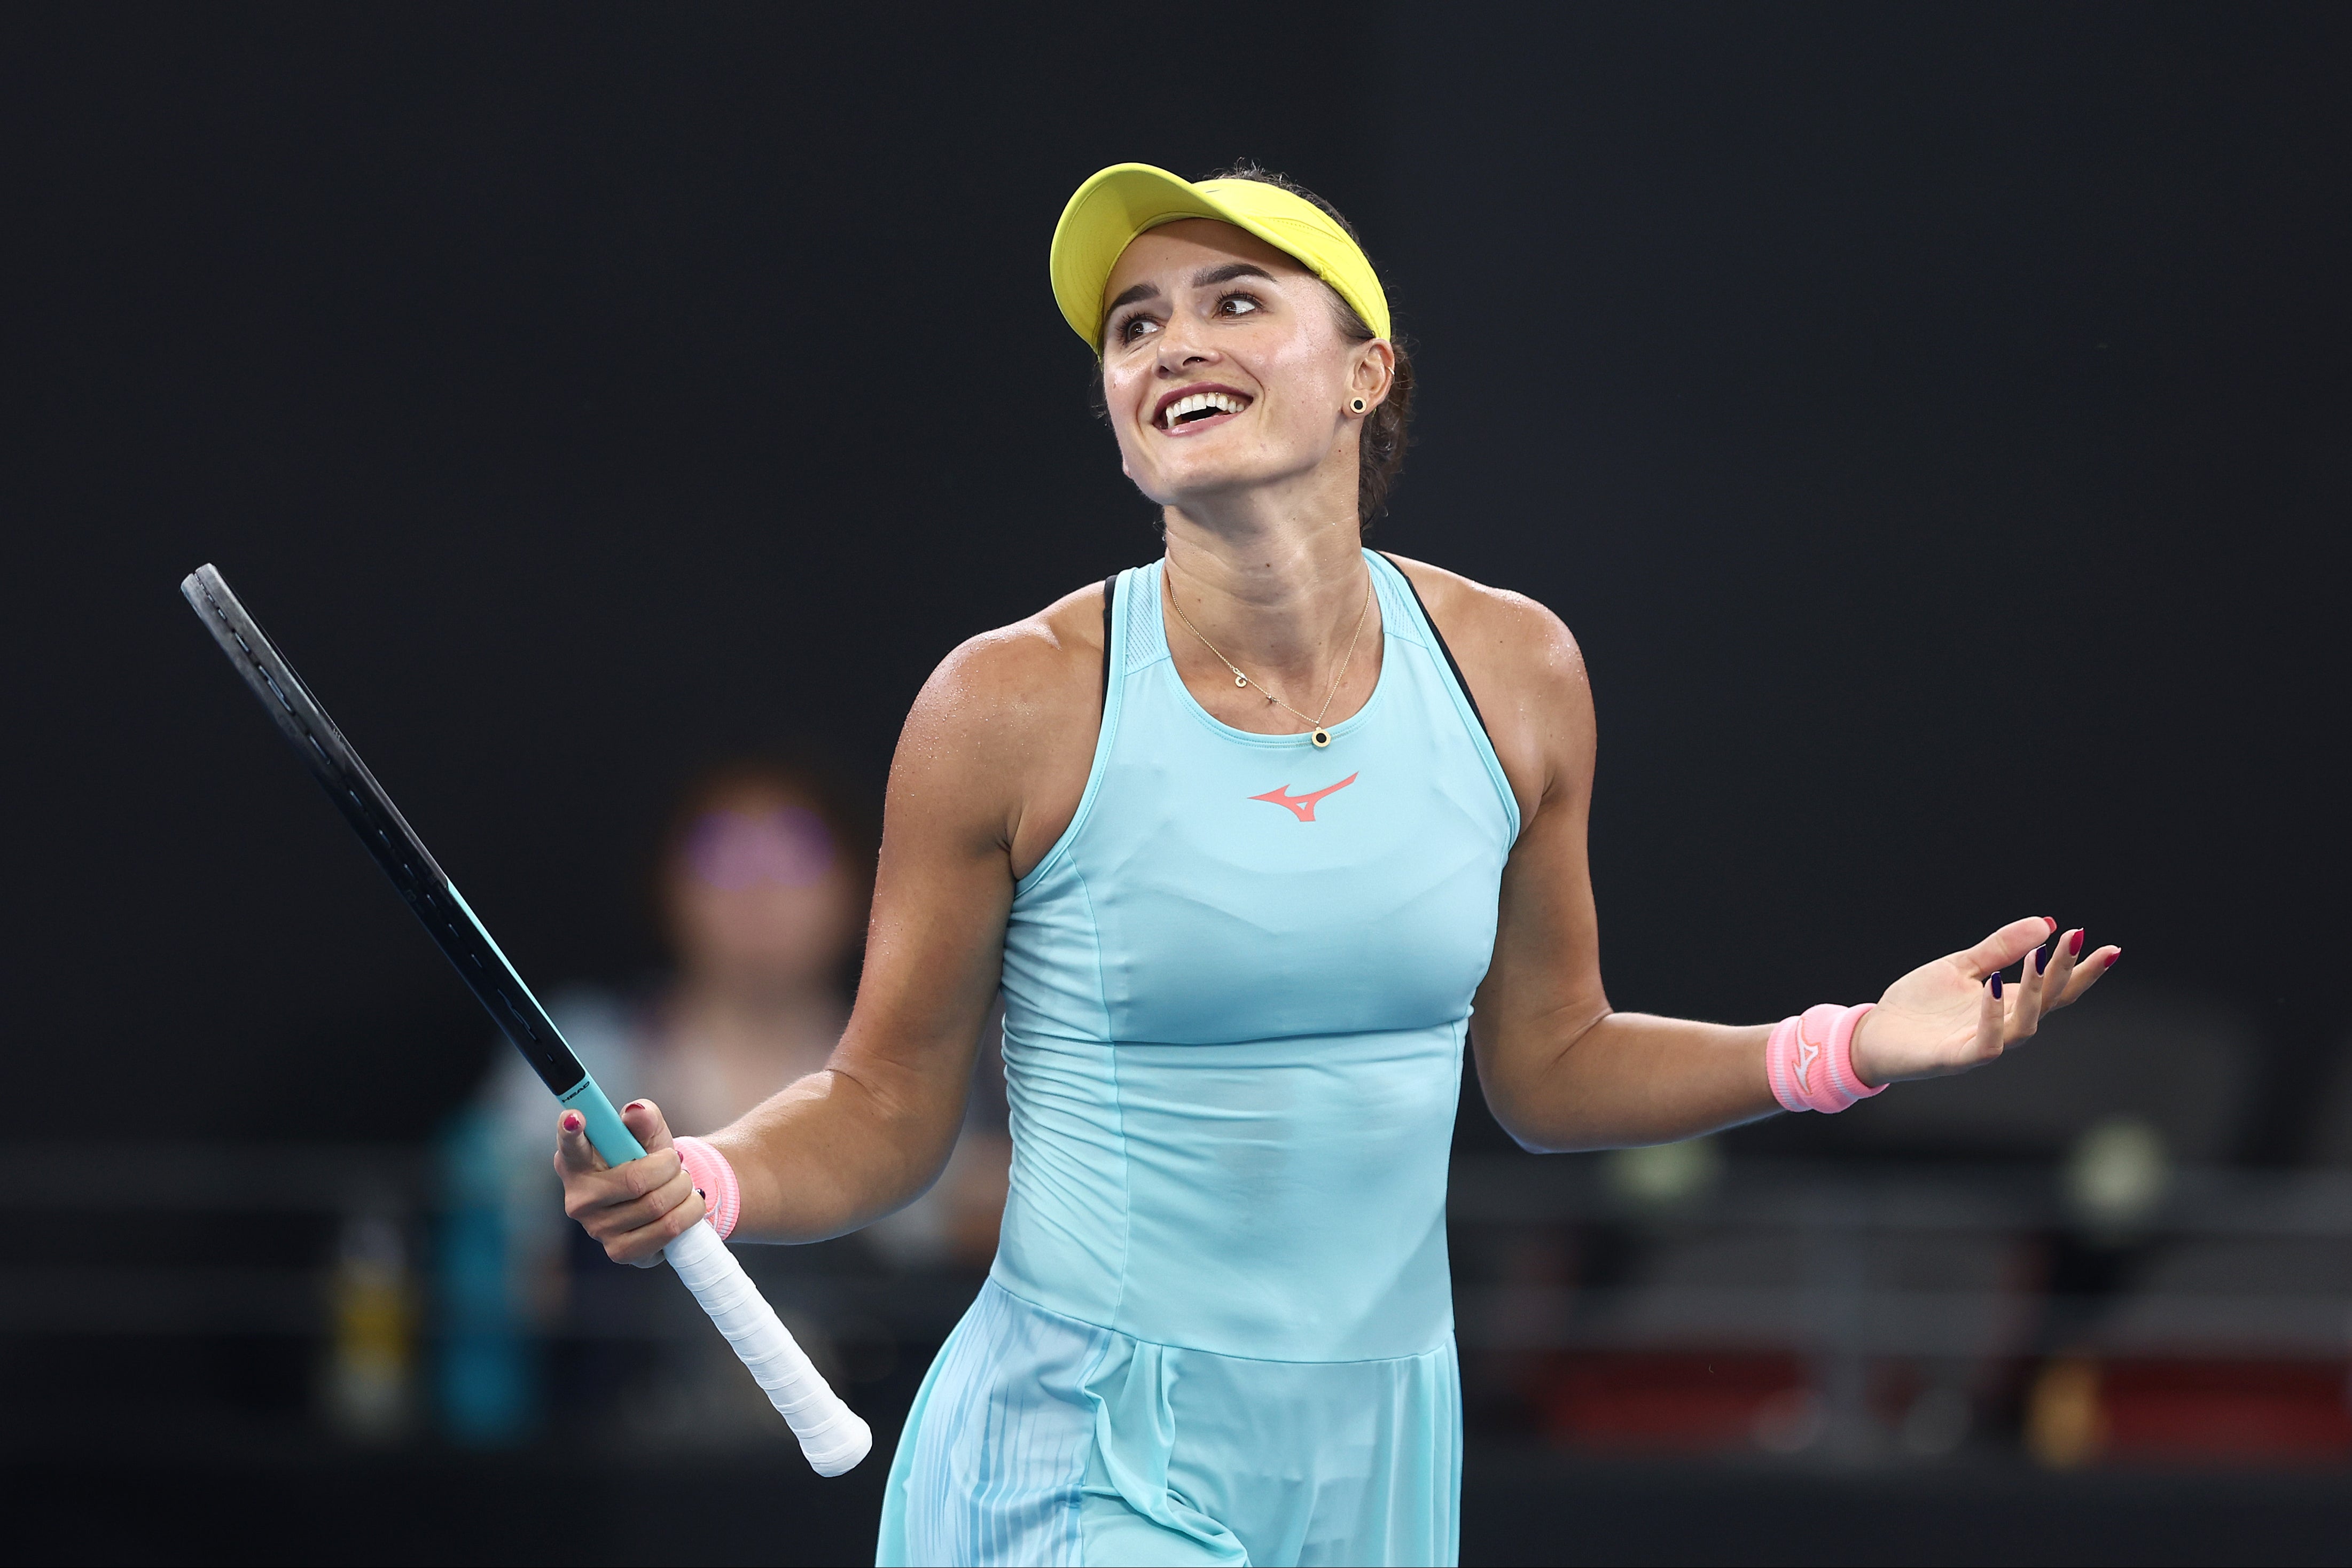 Arina Rodionova has been overlooked by the organisers of the Australian Open